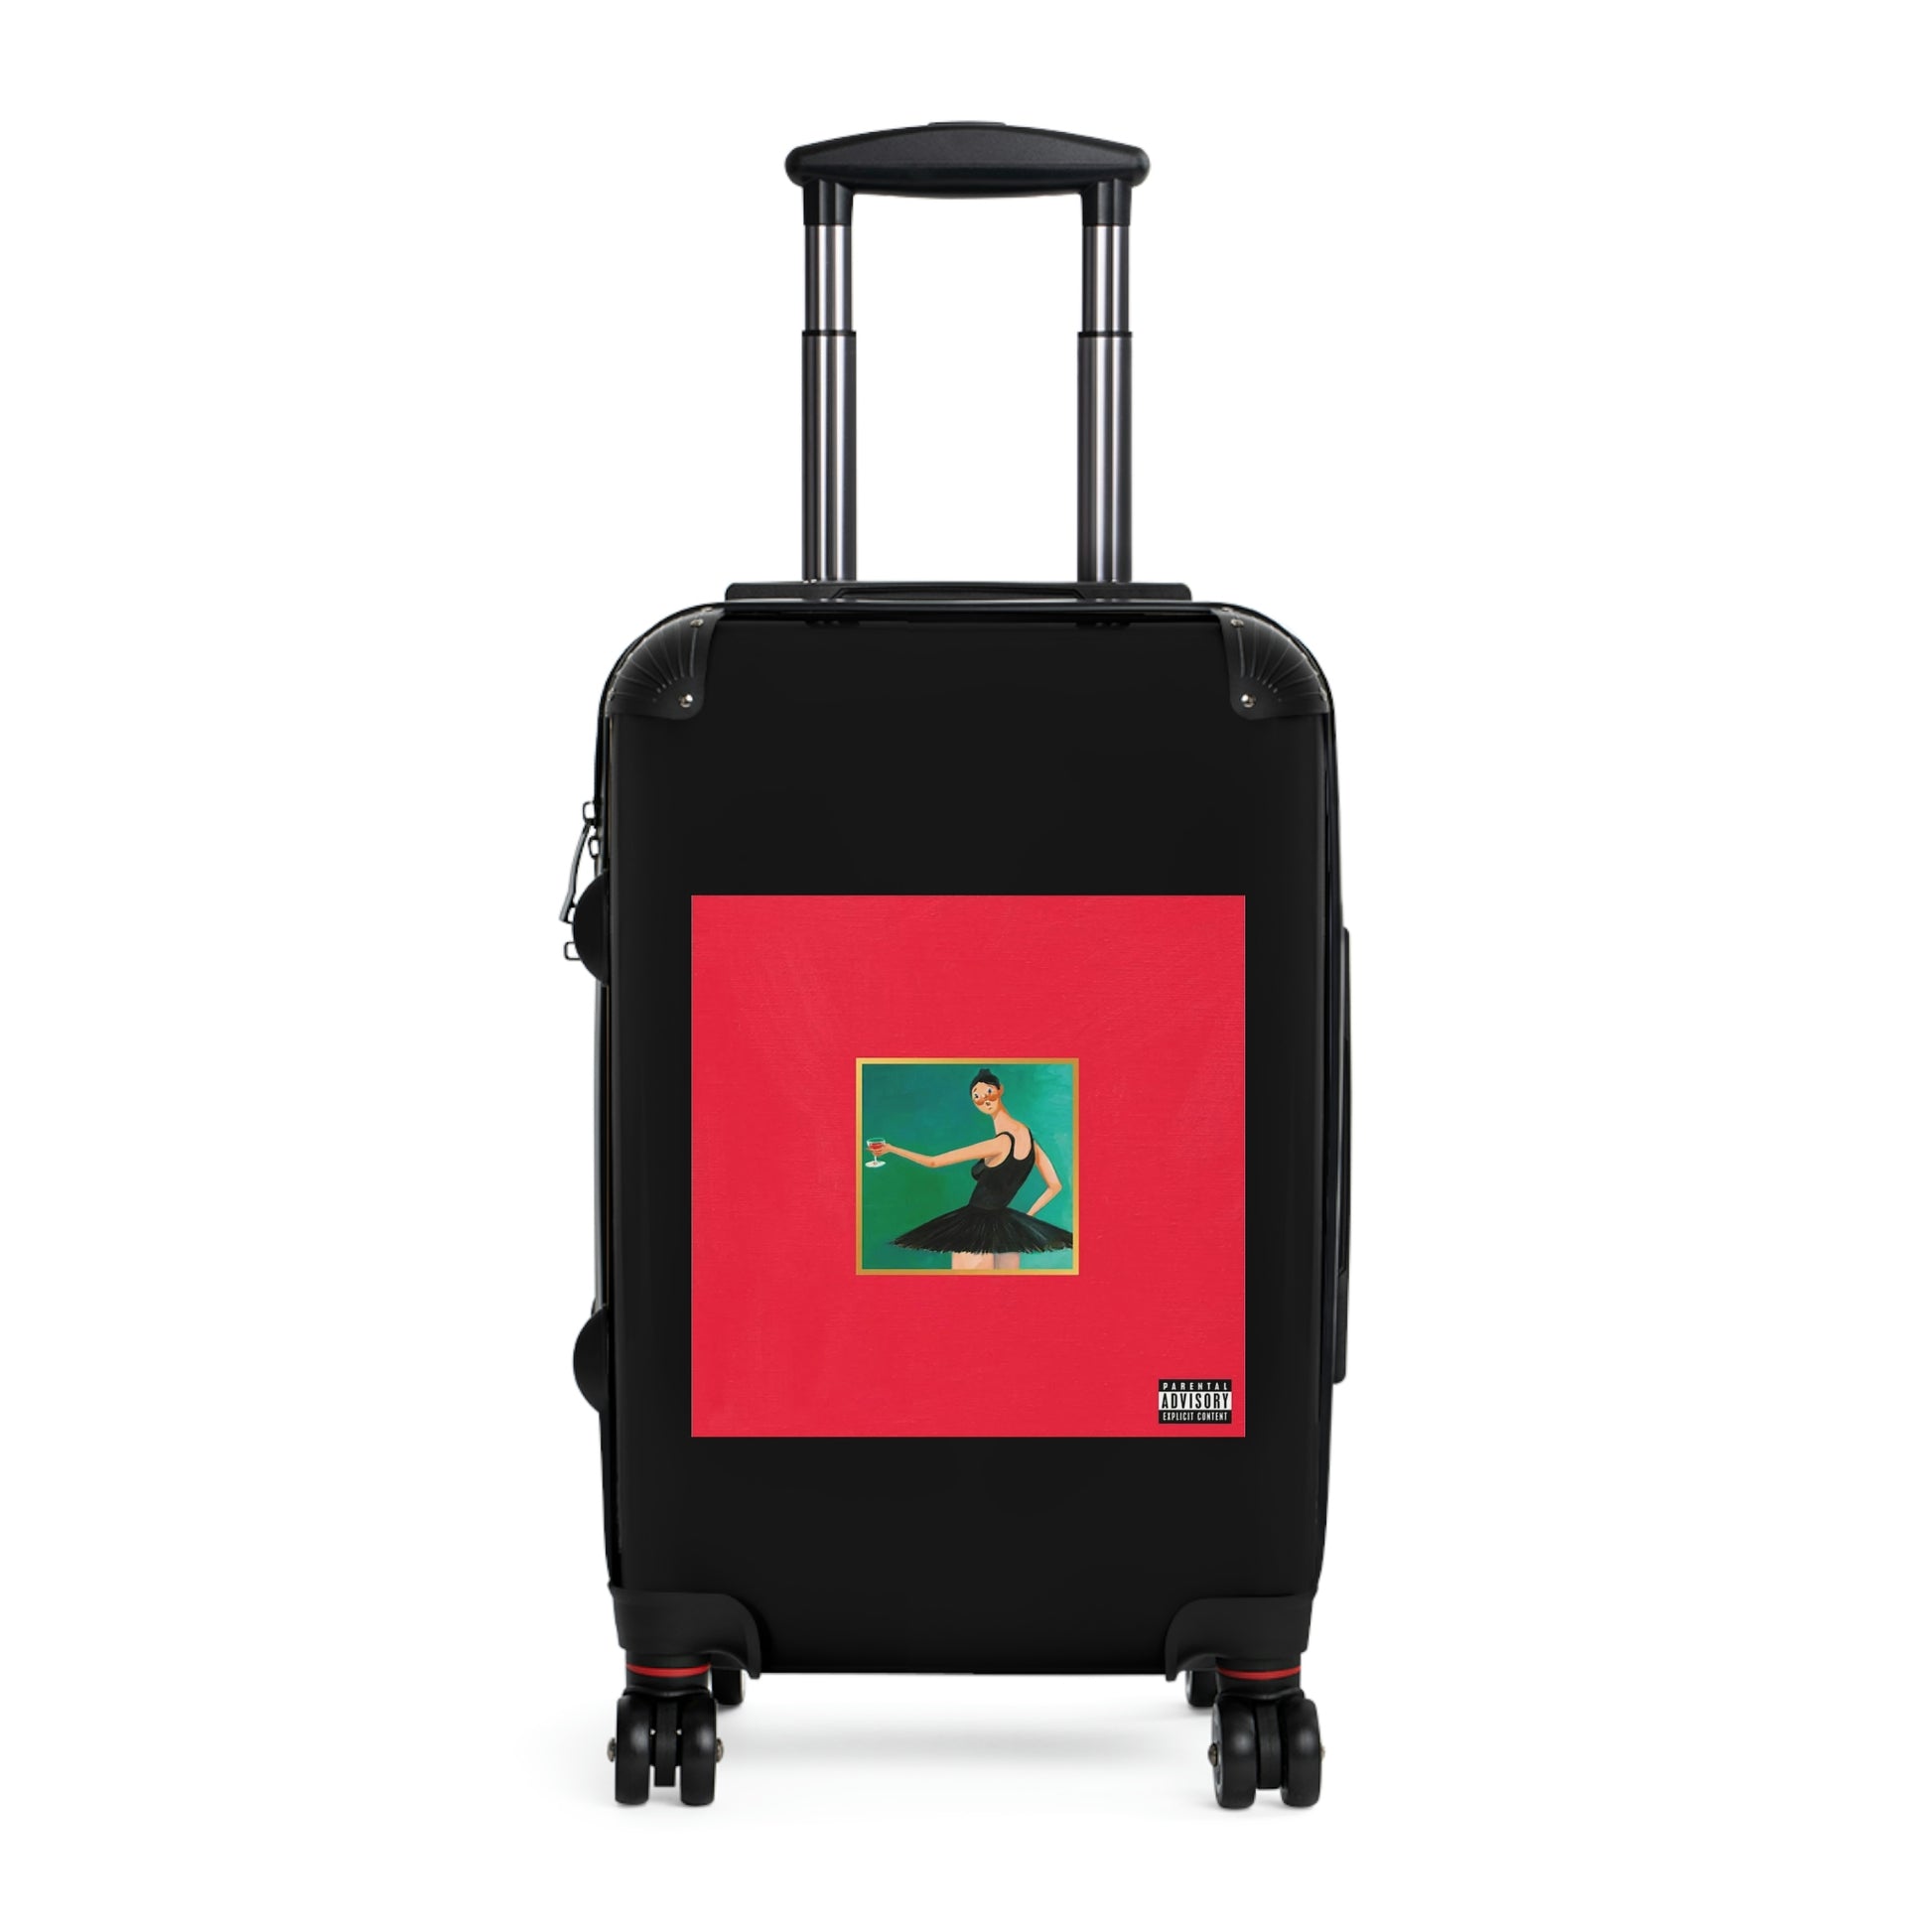 Copy of Kanye West My Beautiful Dark Twisted Fantasy 2010 Cabin Suitcase